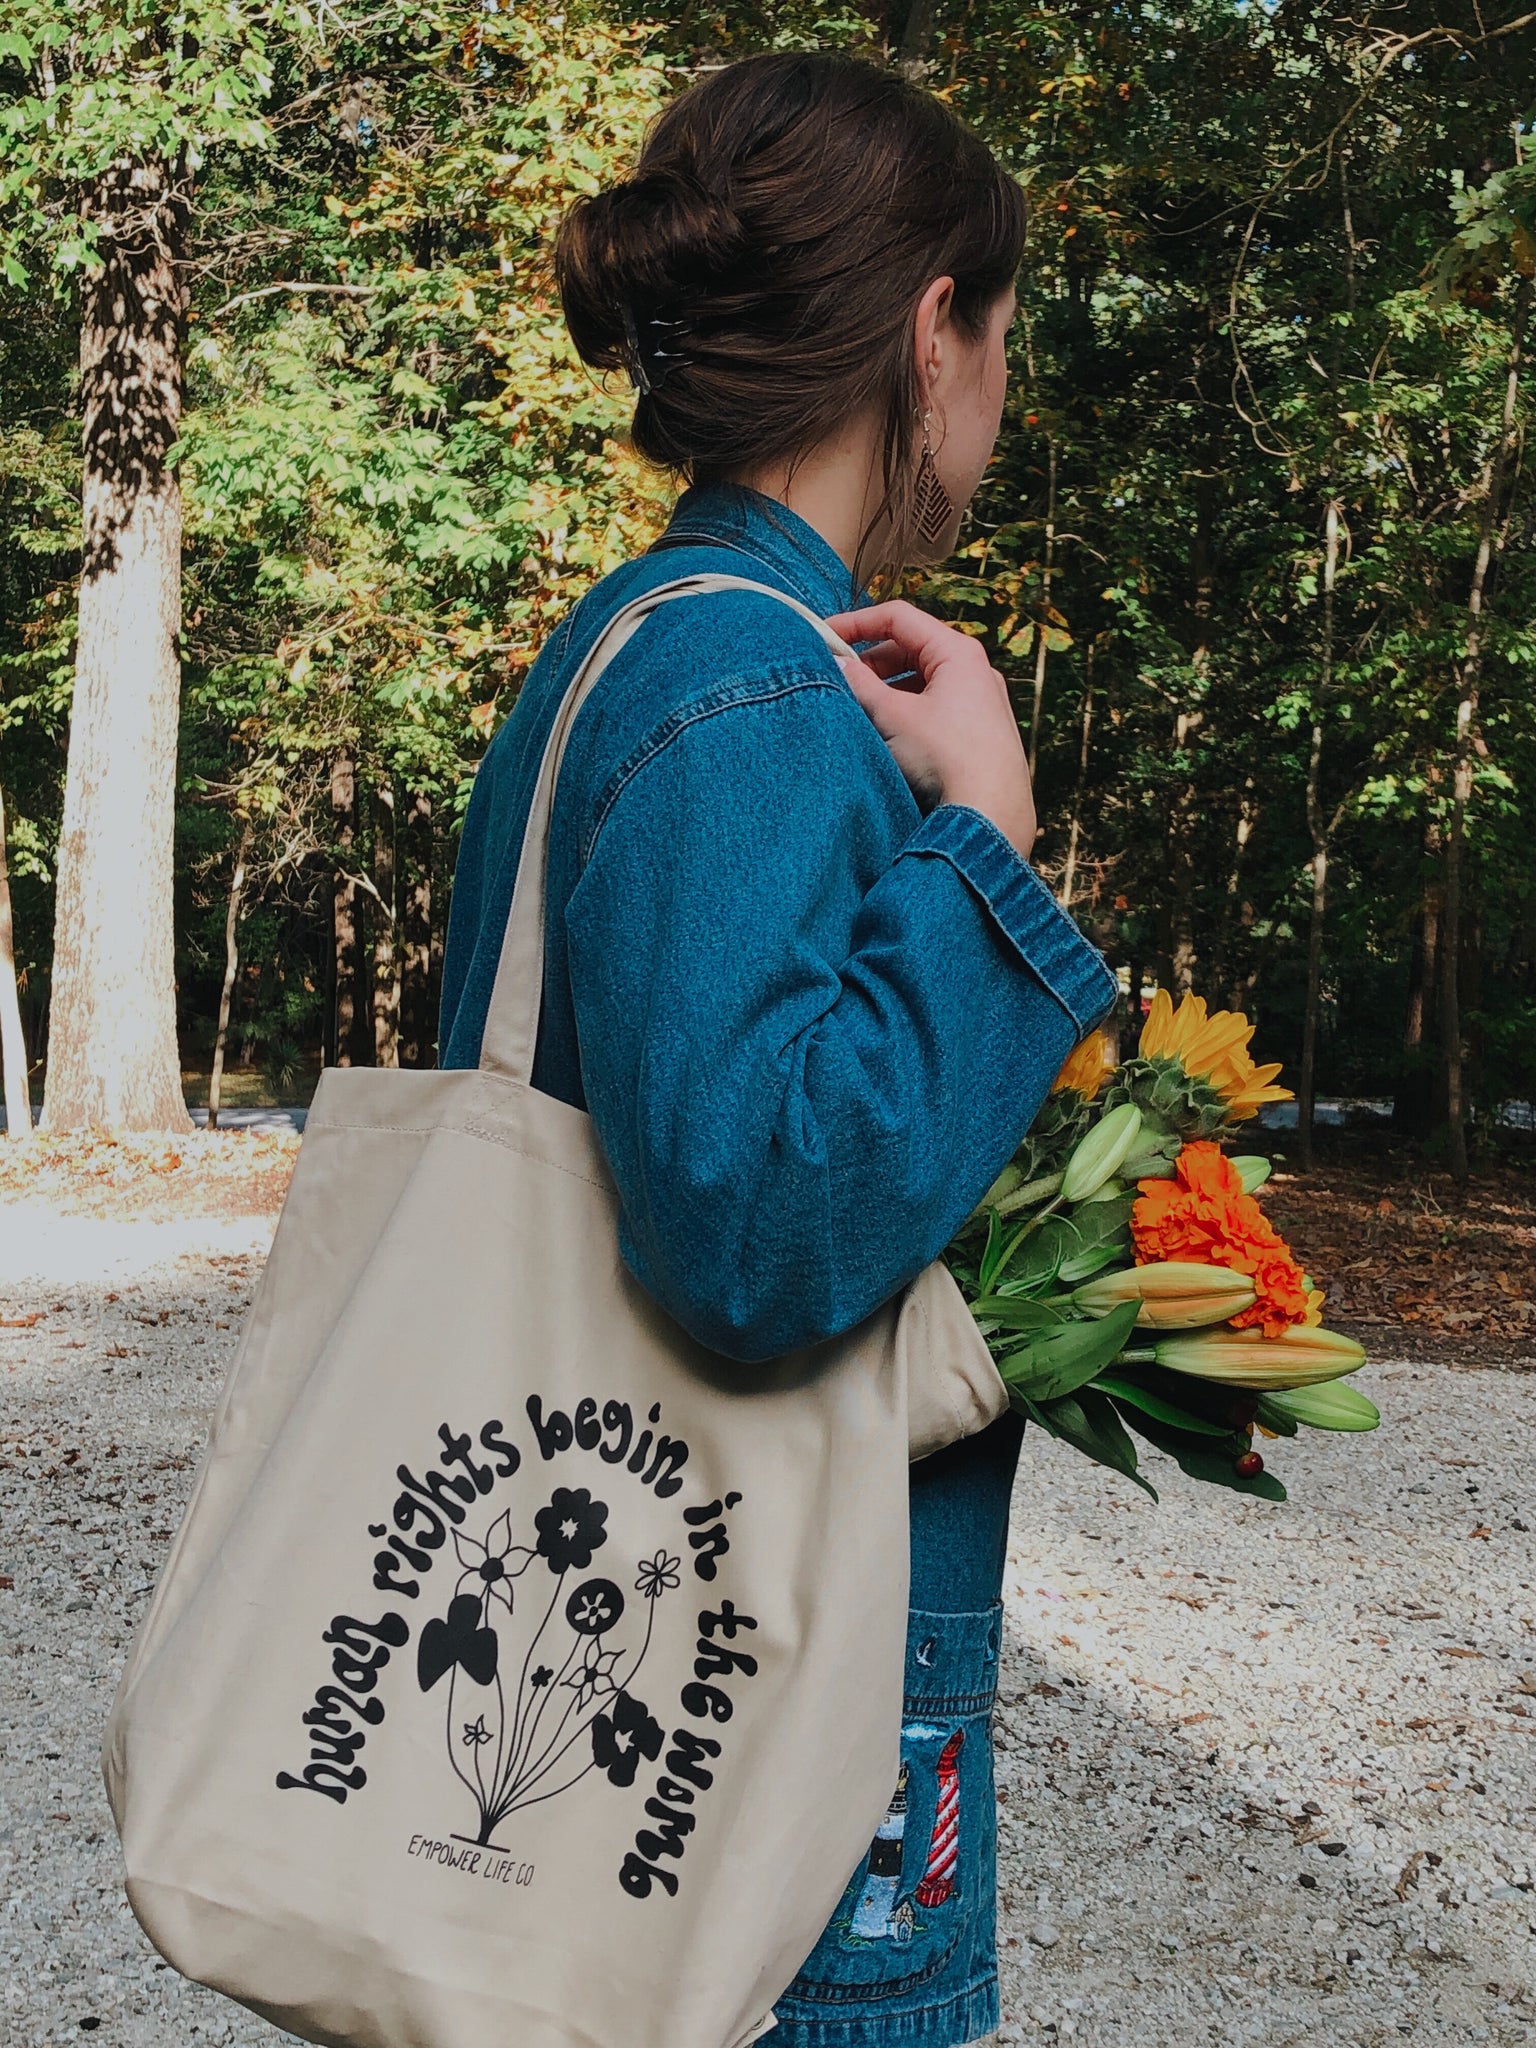 Human Rights Tote Bag – Empower Life Co.